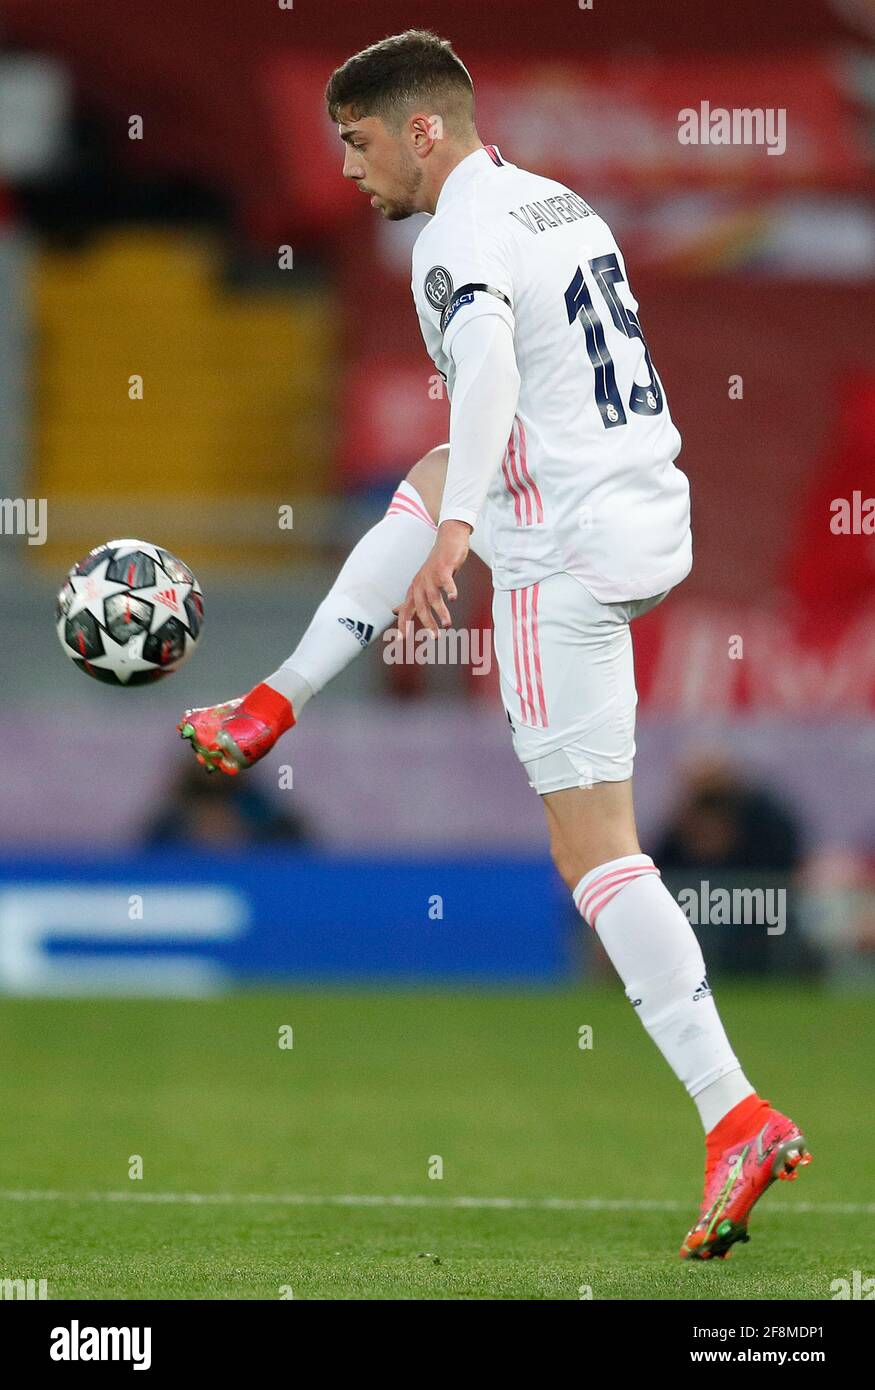 Liverpool, England, 14th April 2021.  Federico Valverde of Real Madrid during the UEFA Champions League match at Anfield, Liverpool. Picture credit should read: Darren Staples / Sportimage Stock Photo